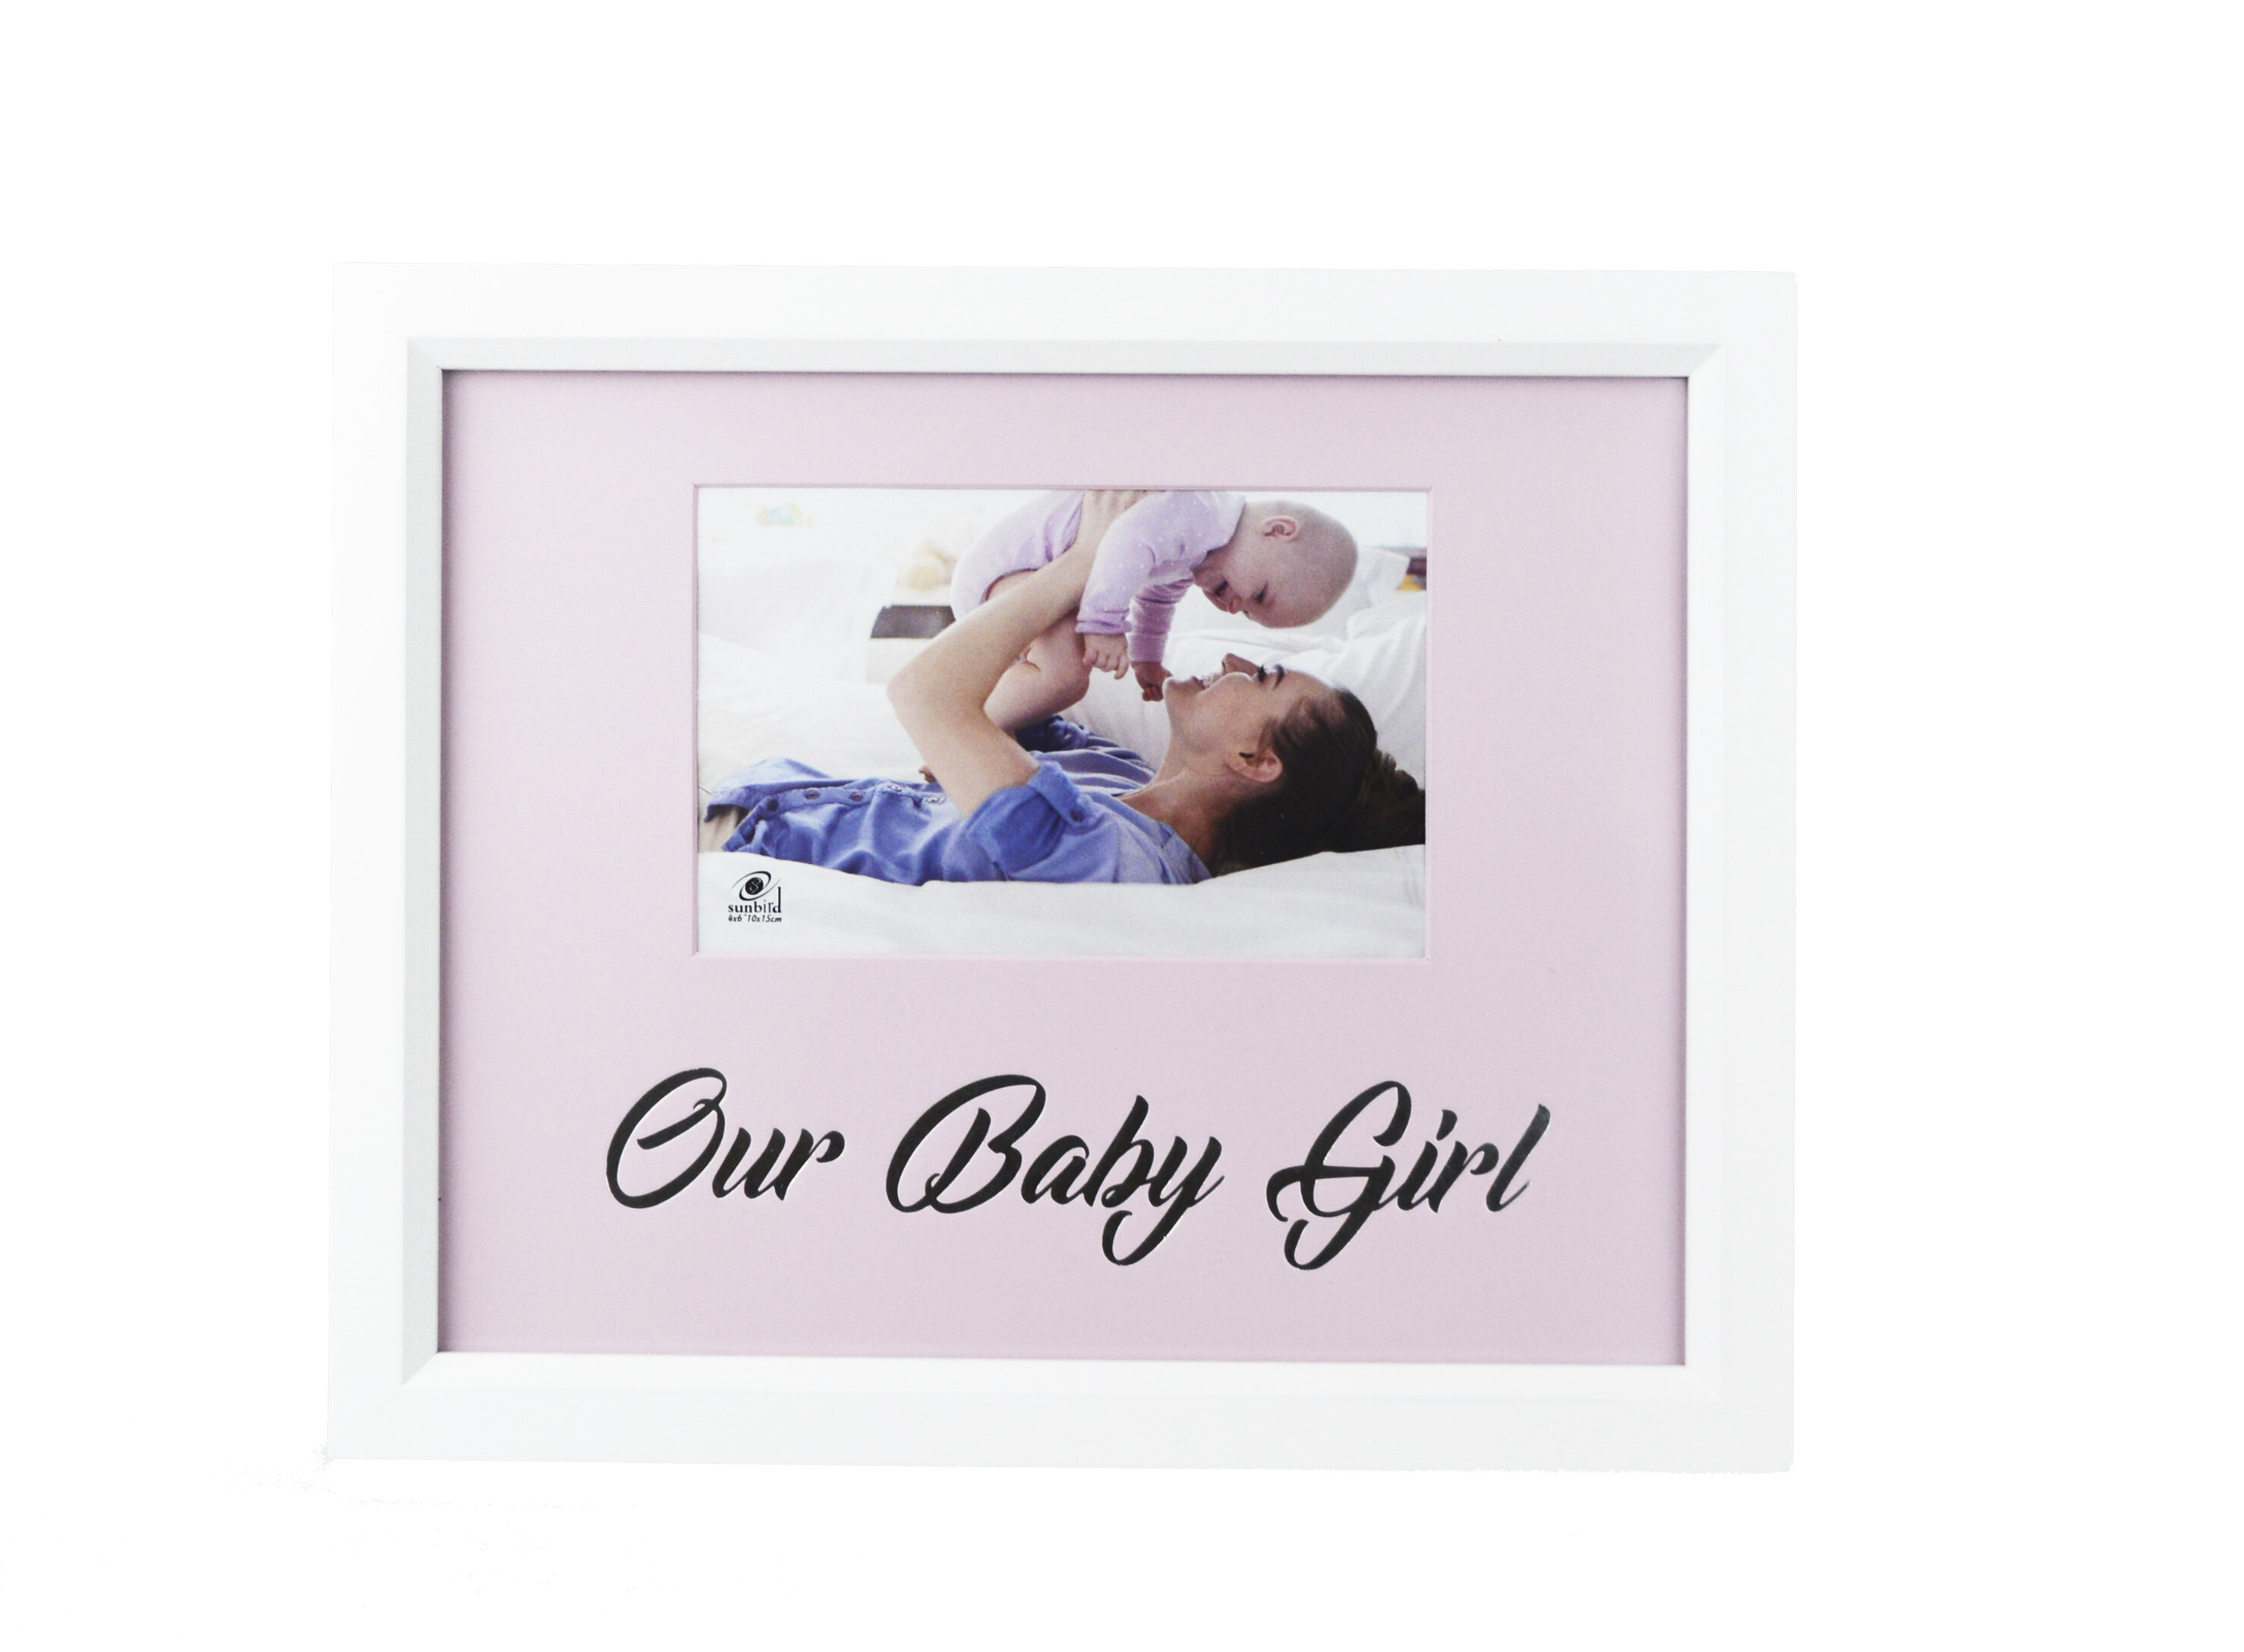 Our baby girl new born pink 4x6" wooden photo frame with foil silver fonts celebrities